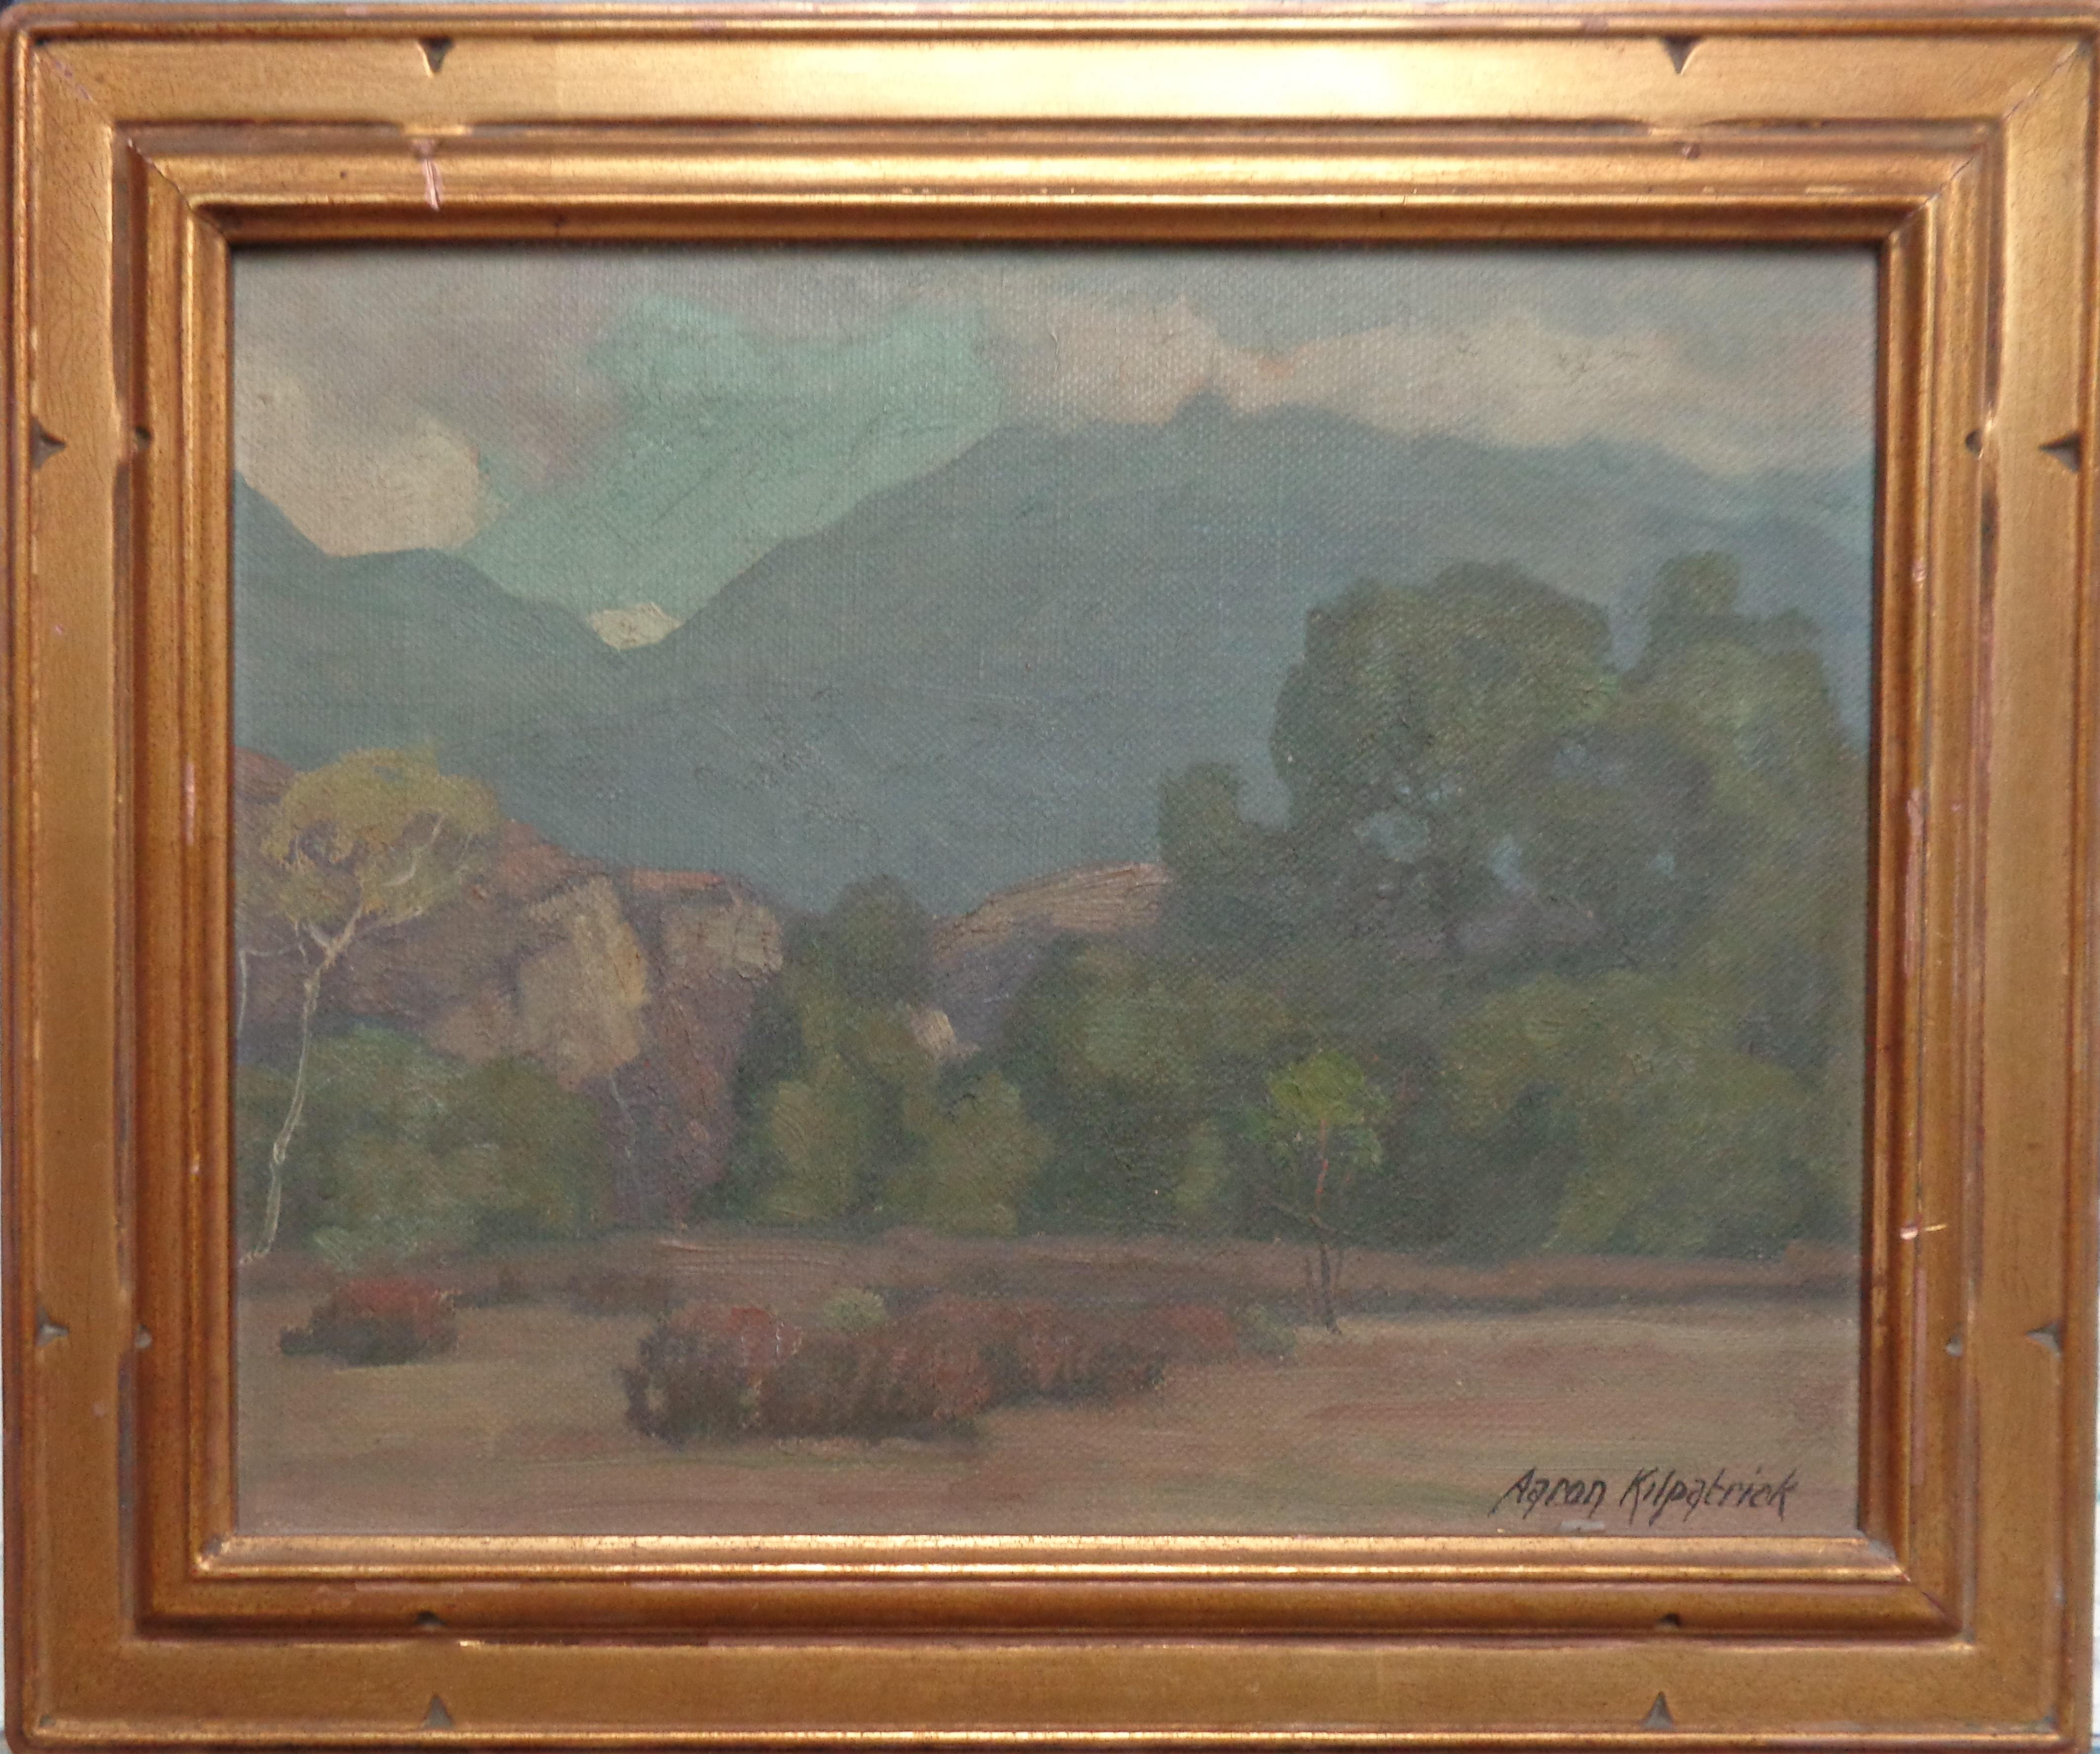 Aaron E. Kilpatrick
Landscape painter. Born in St Thomas, Canada on April 7, 1872. Kilpatrick was educated in the public schools of Winnipeg and moved to the U.S. in 1892. By 1907 he had settled in southern California and established a commercial